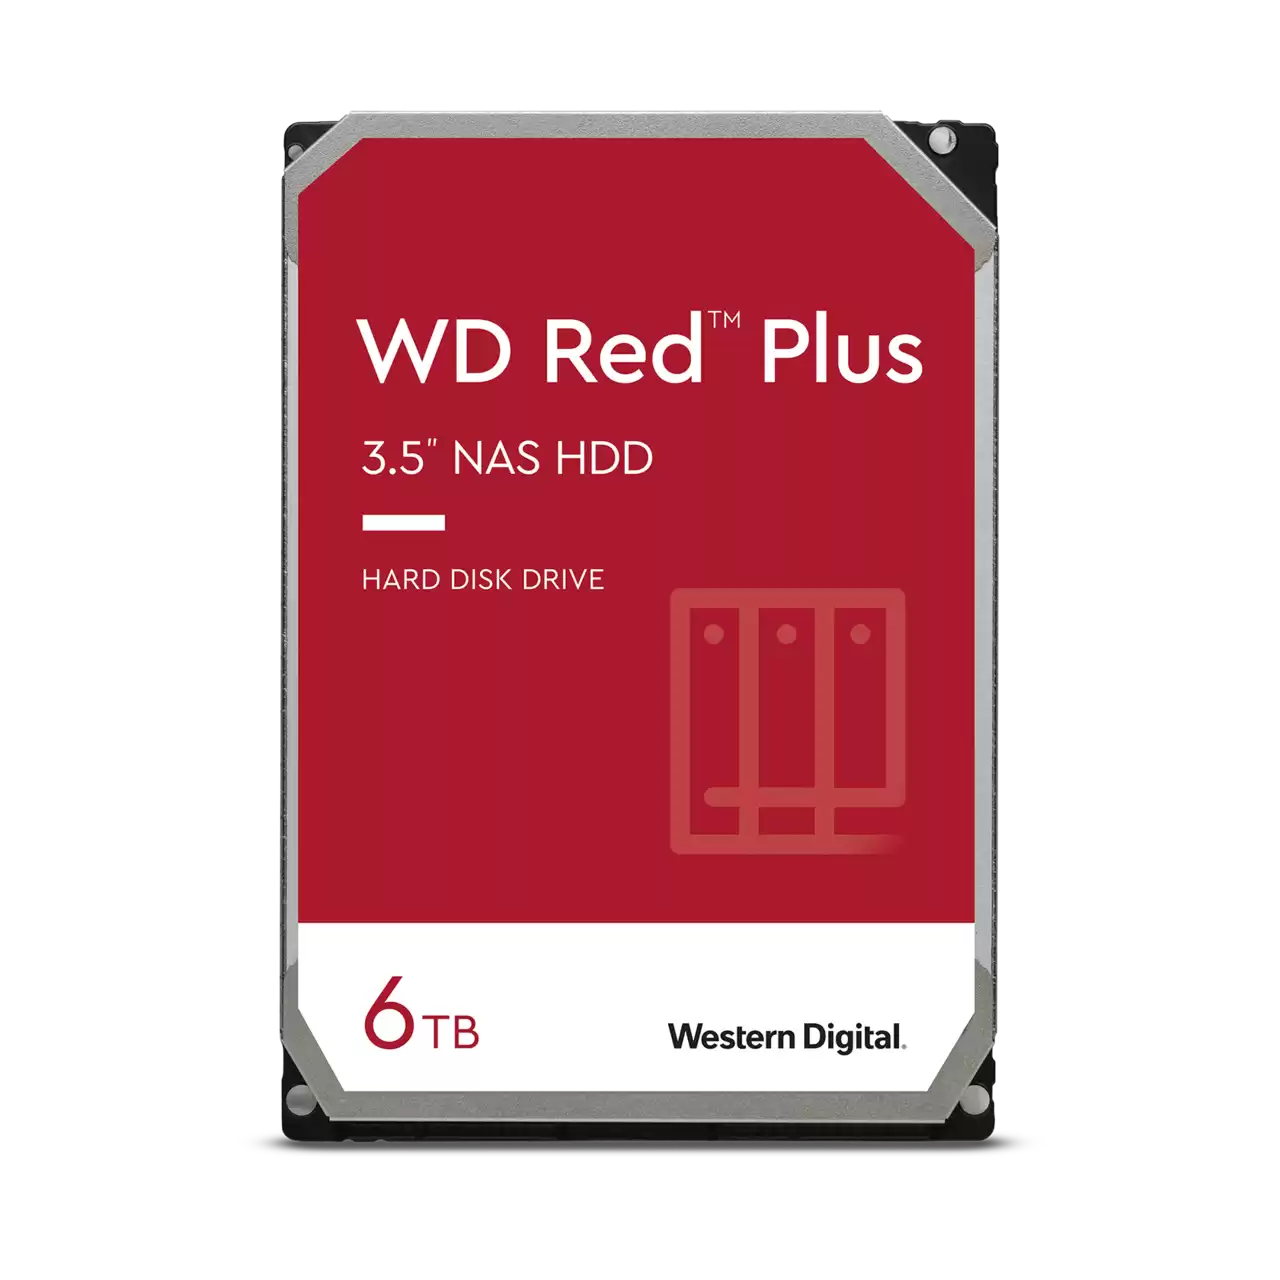 WD Red™ Plus CMR 6TB SATA 3.5 128 MB Cache HDD